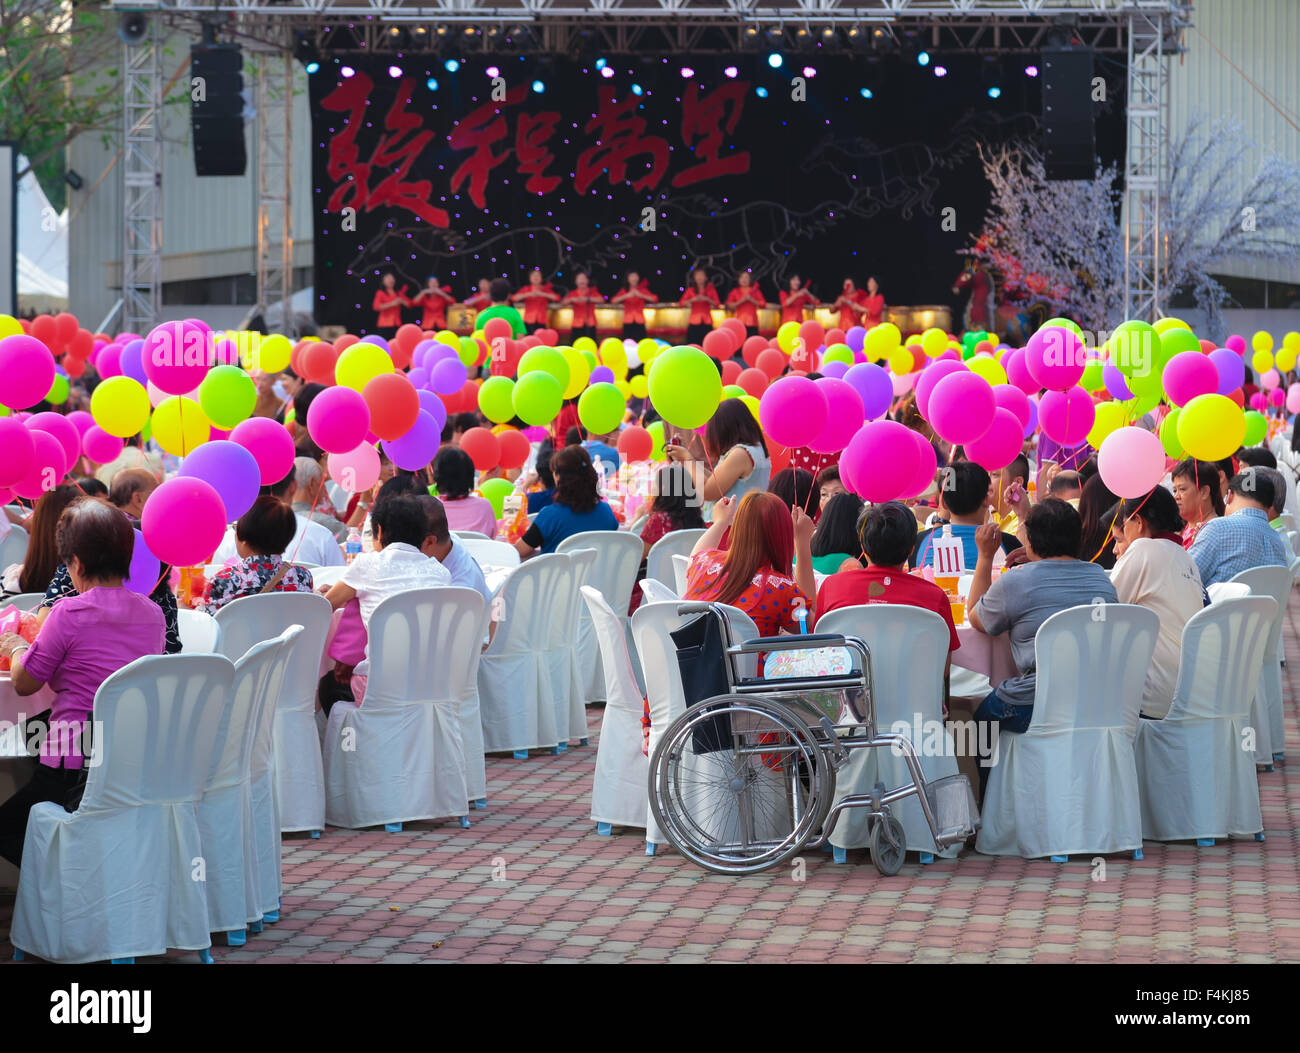 Audience holding their balloons while watching the stage show at FGS temple, Jenjarom Malaysia during chinese new year 2014. Stock Photo